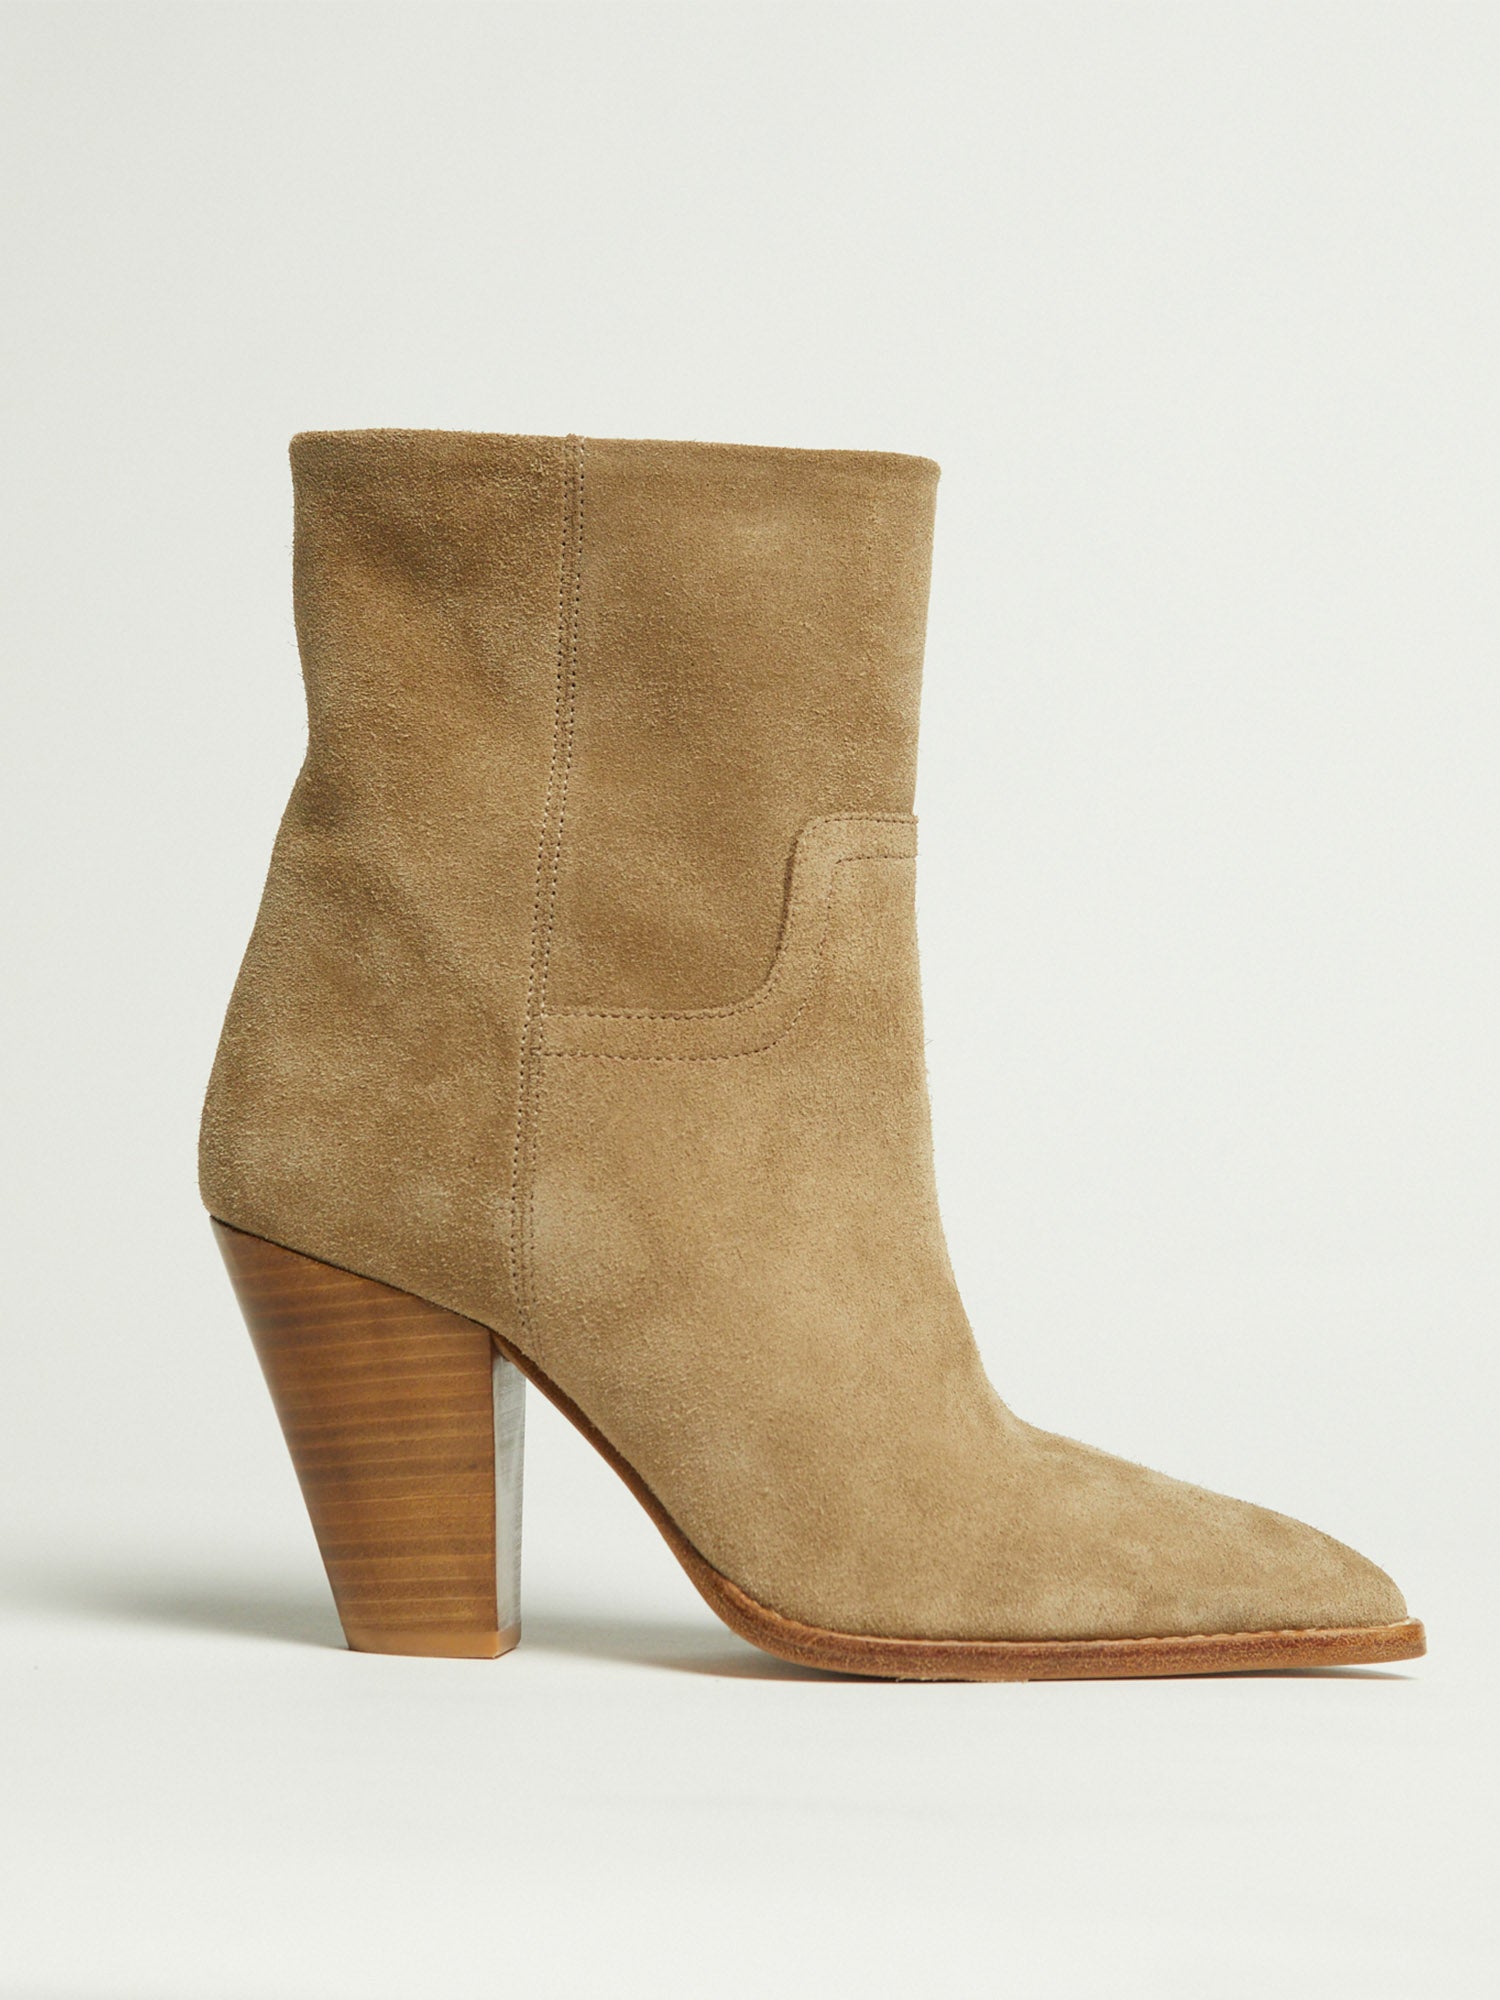 Women's Marfa Suede Ankle Boot, Tan